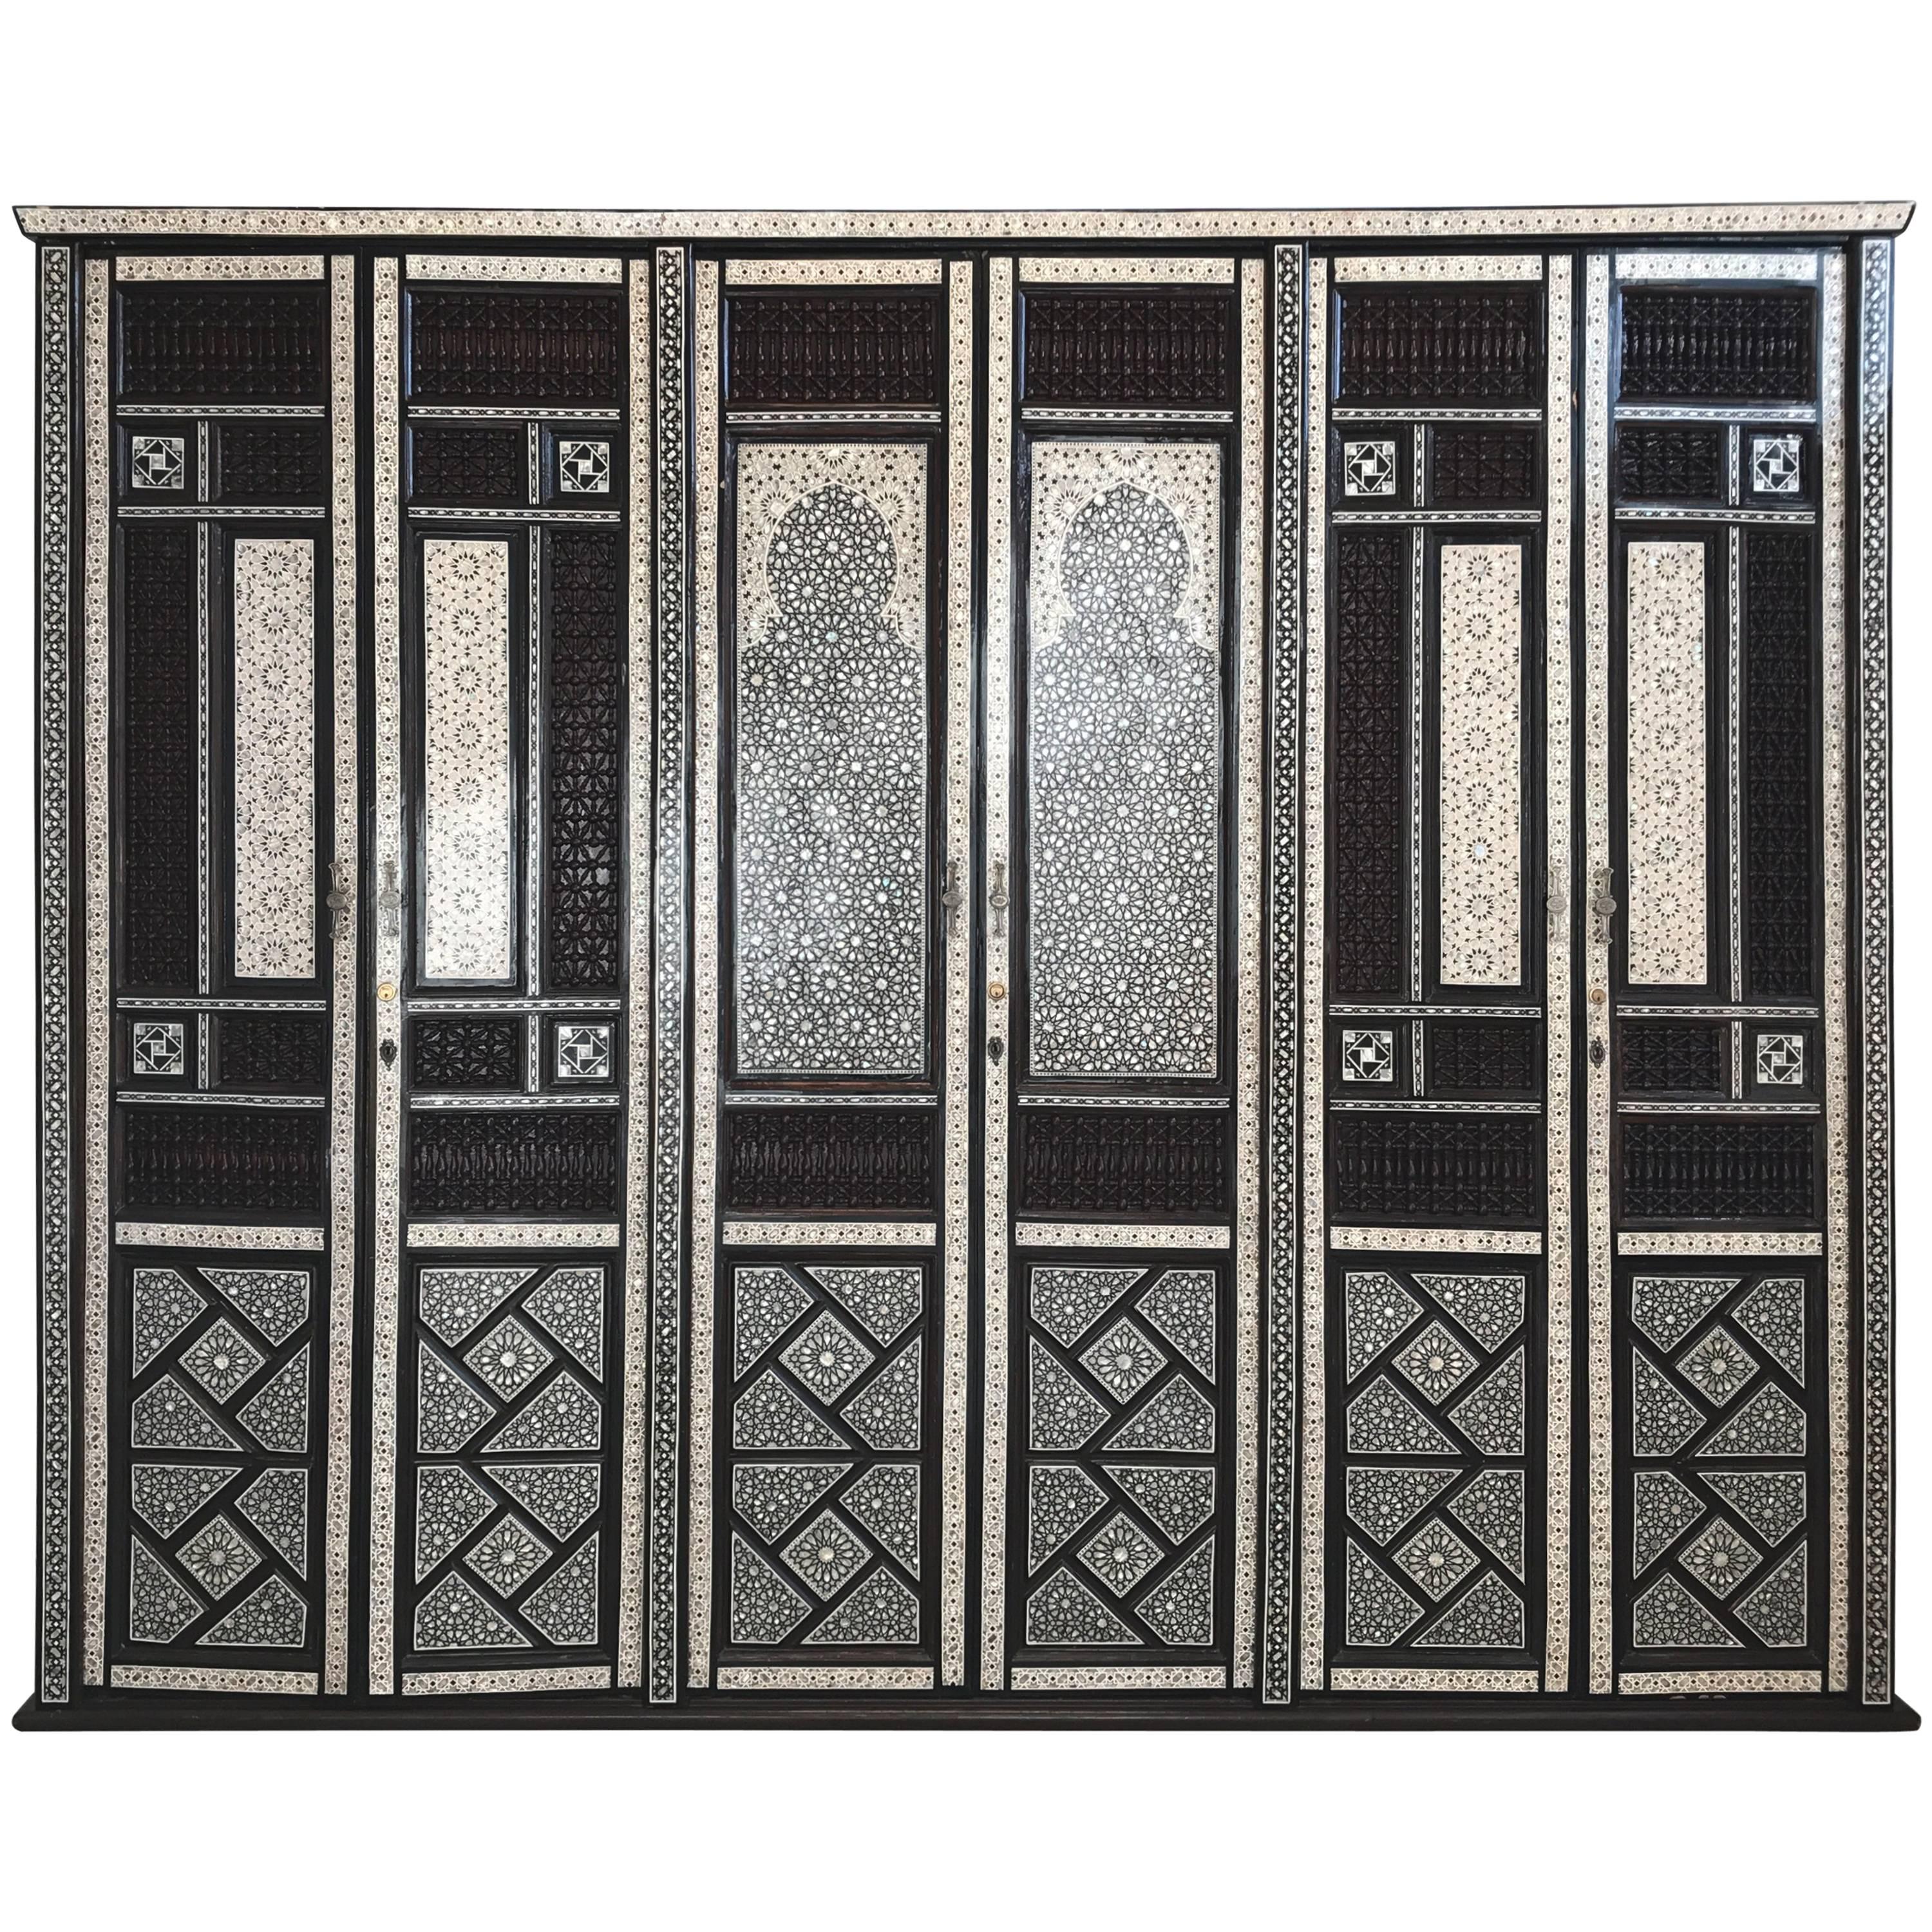 Middle Eastern Bone and Mother-of-Pearl Lacquered Inlay Armoire